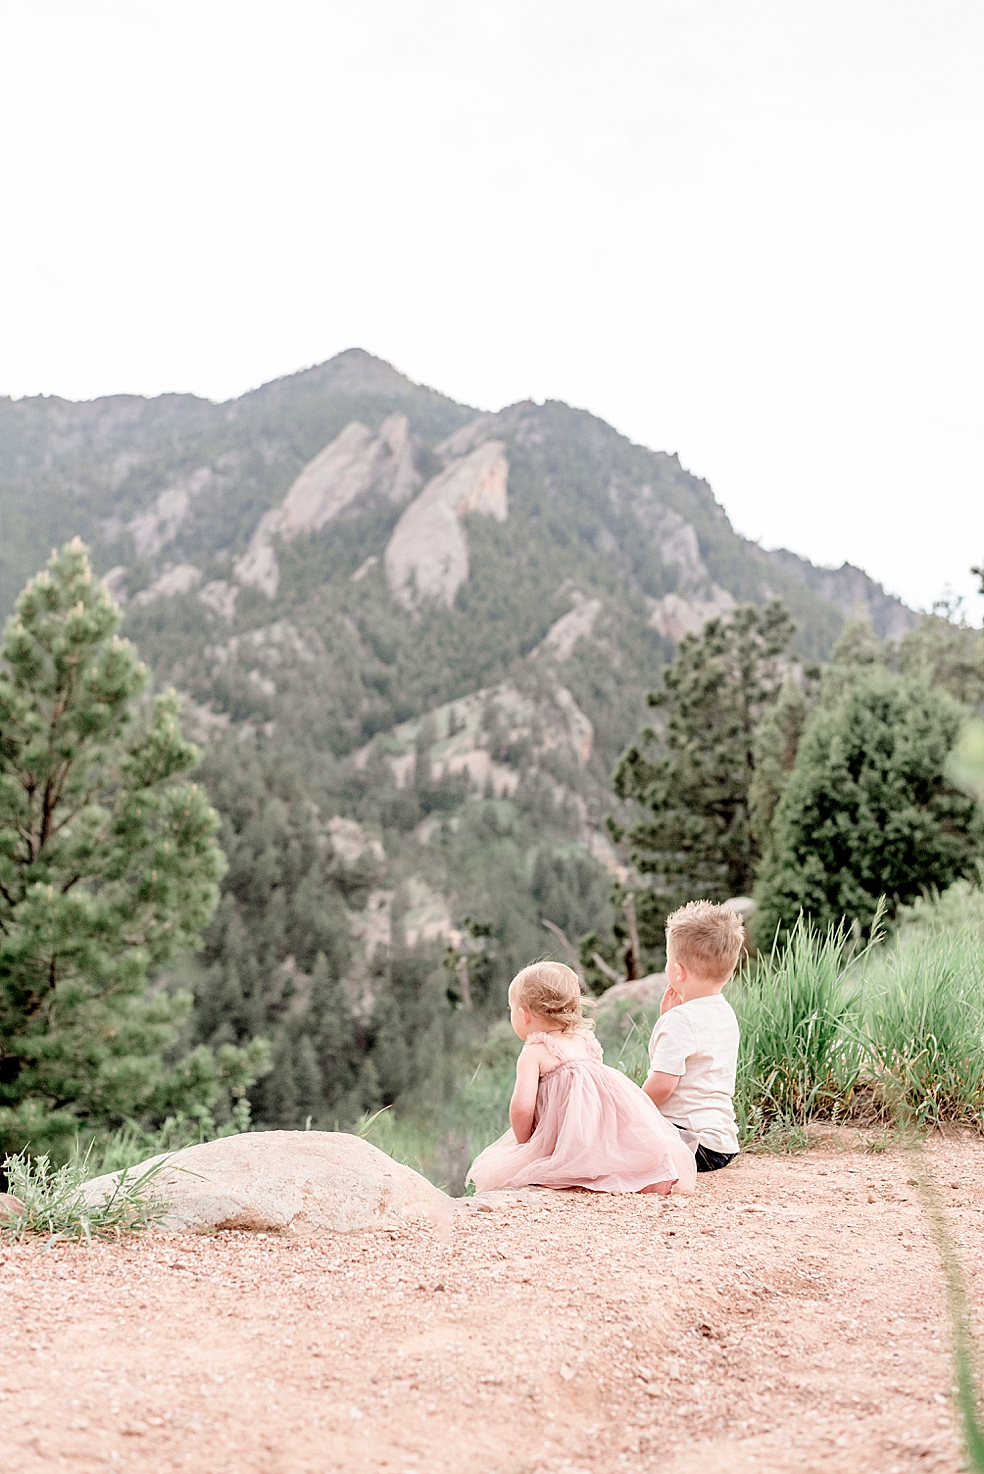 Brother and little sister sitting on the ground looking at mountains | Photo by Jessica Lee Photography